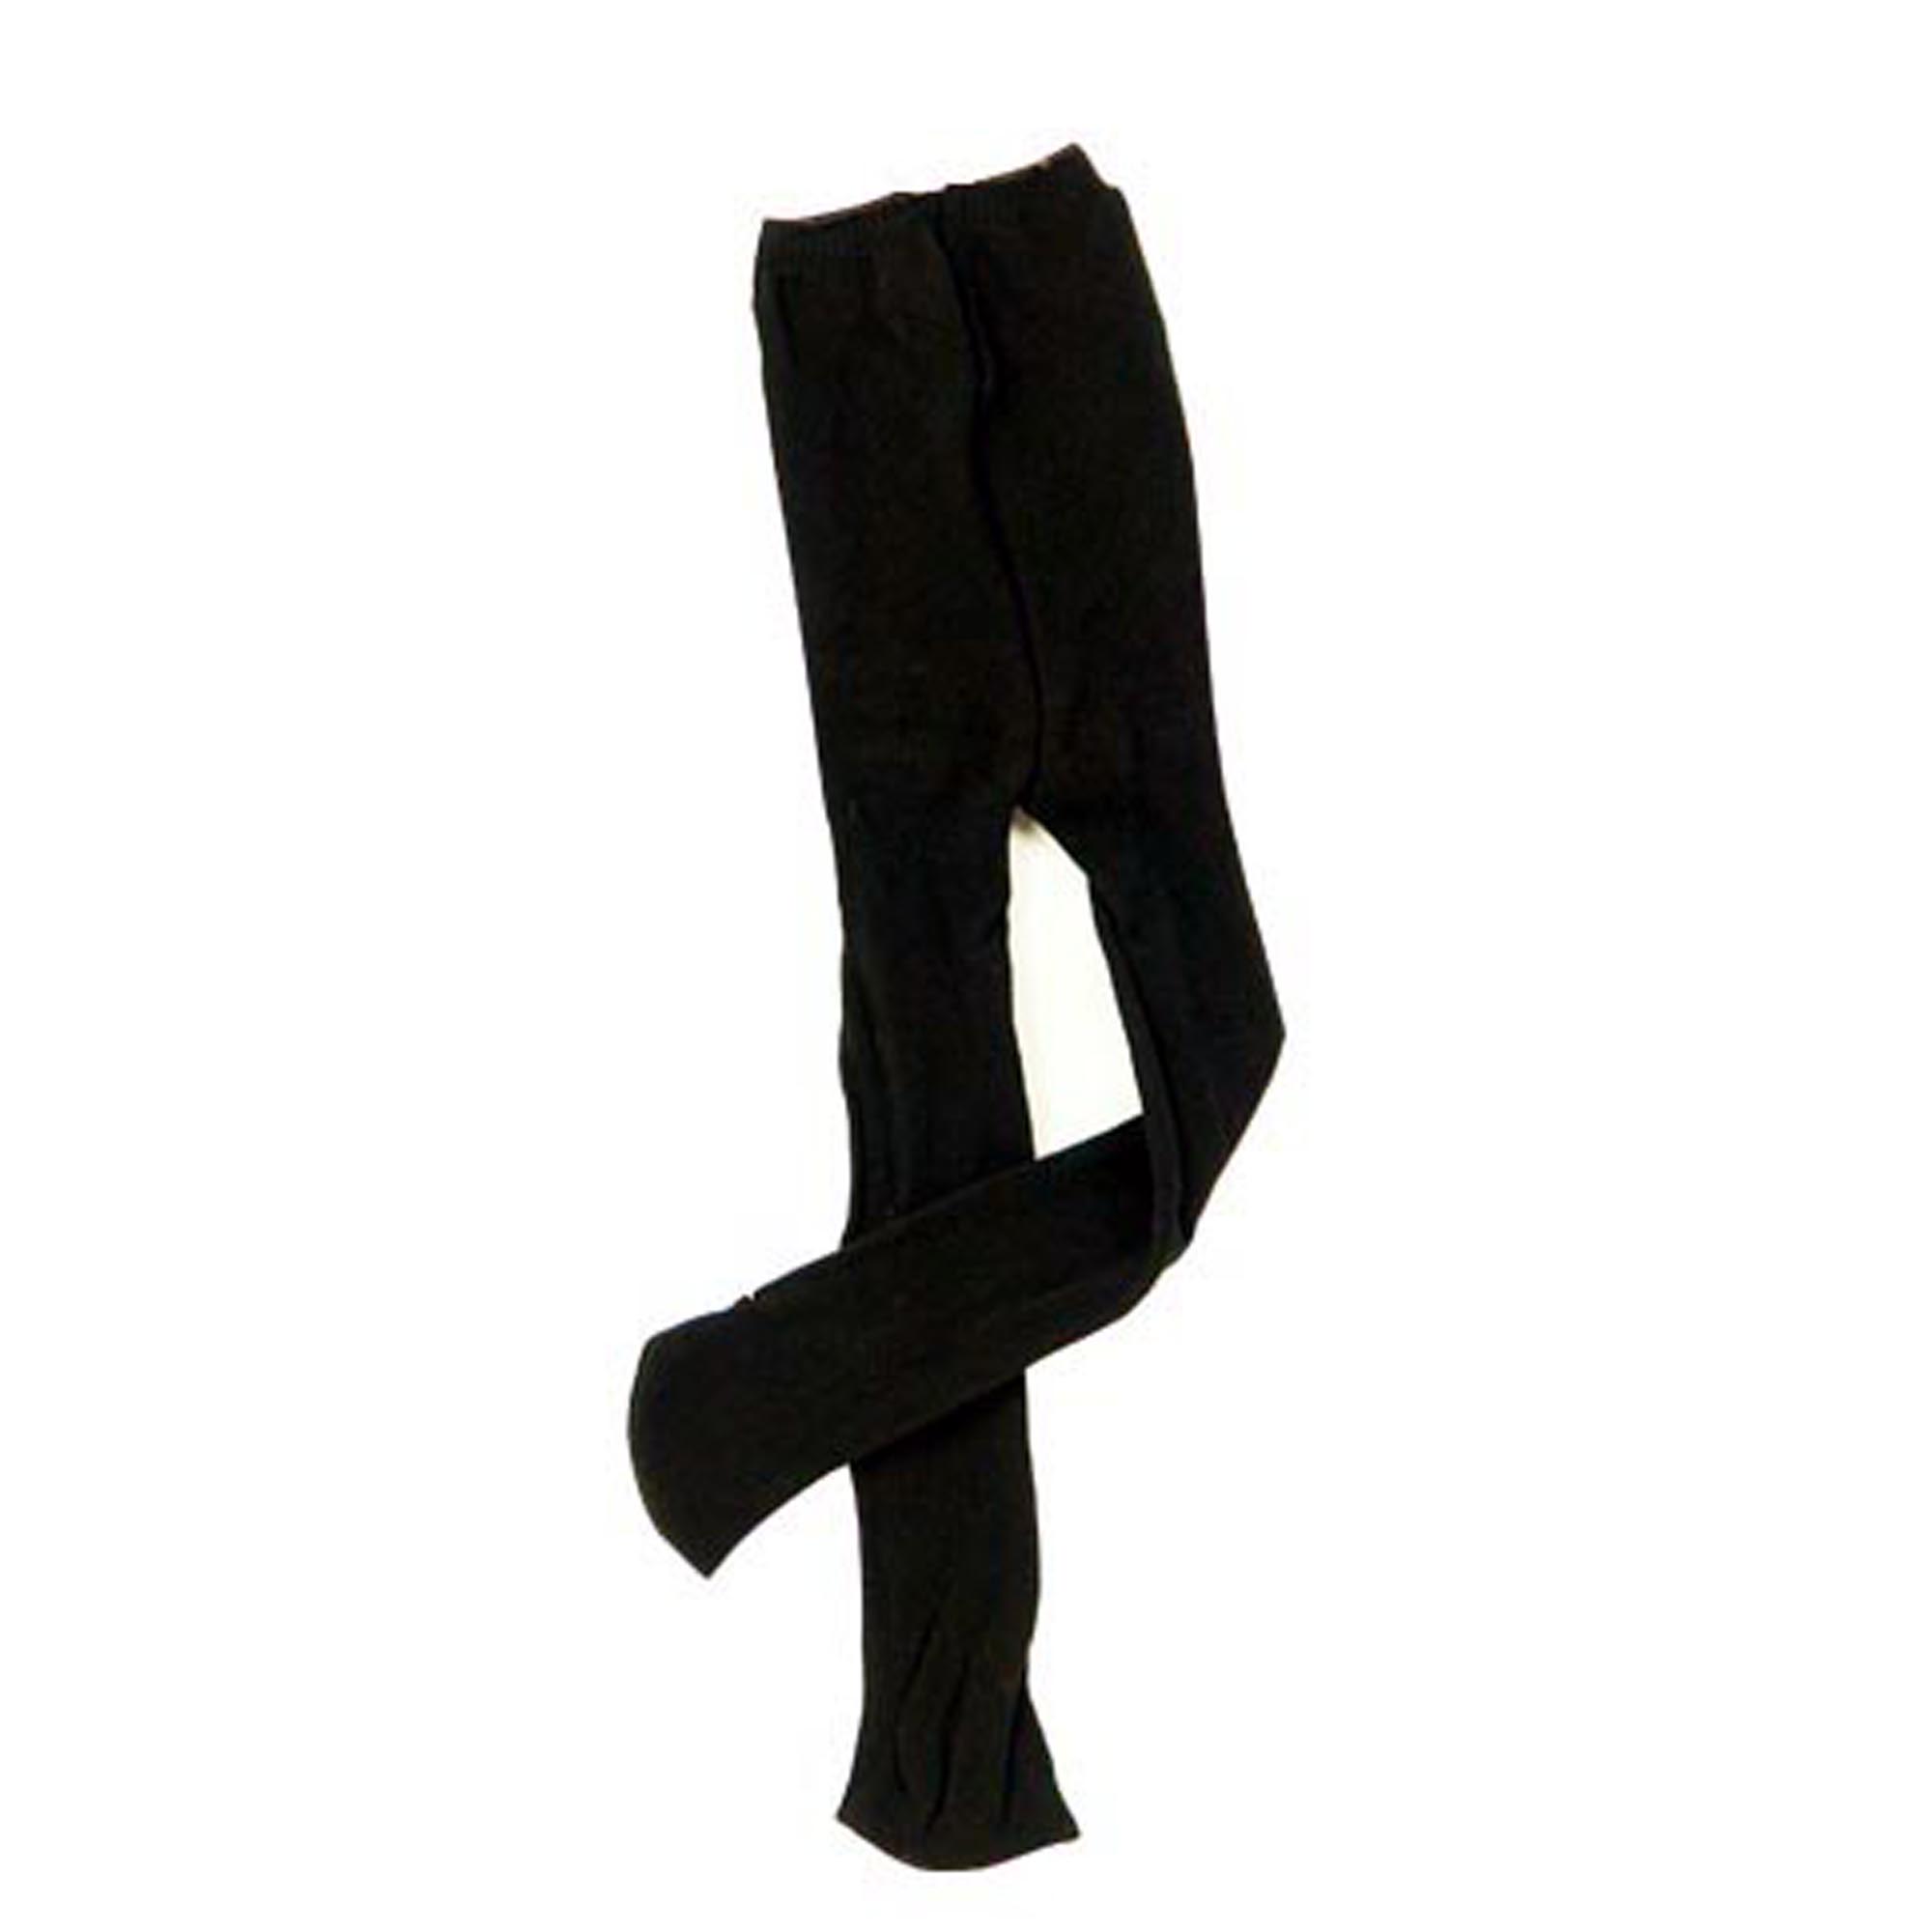 Sophia’s Mix & Match Wardrobe Essentials Basic Solid-Colored Opaque Tights for 18” Dolls, Black